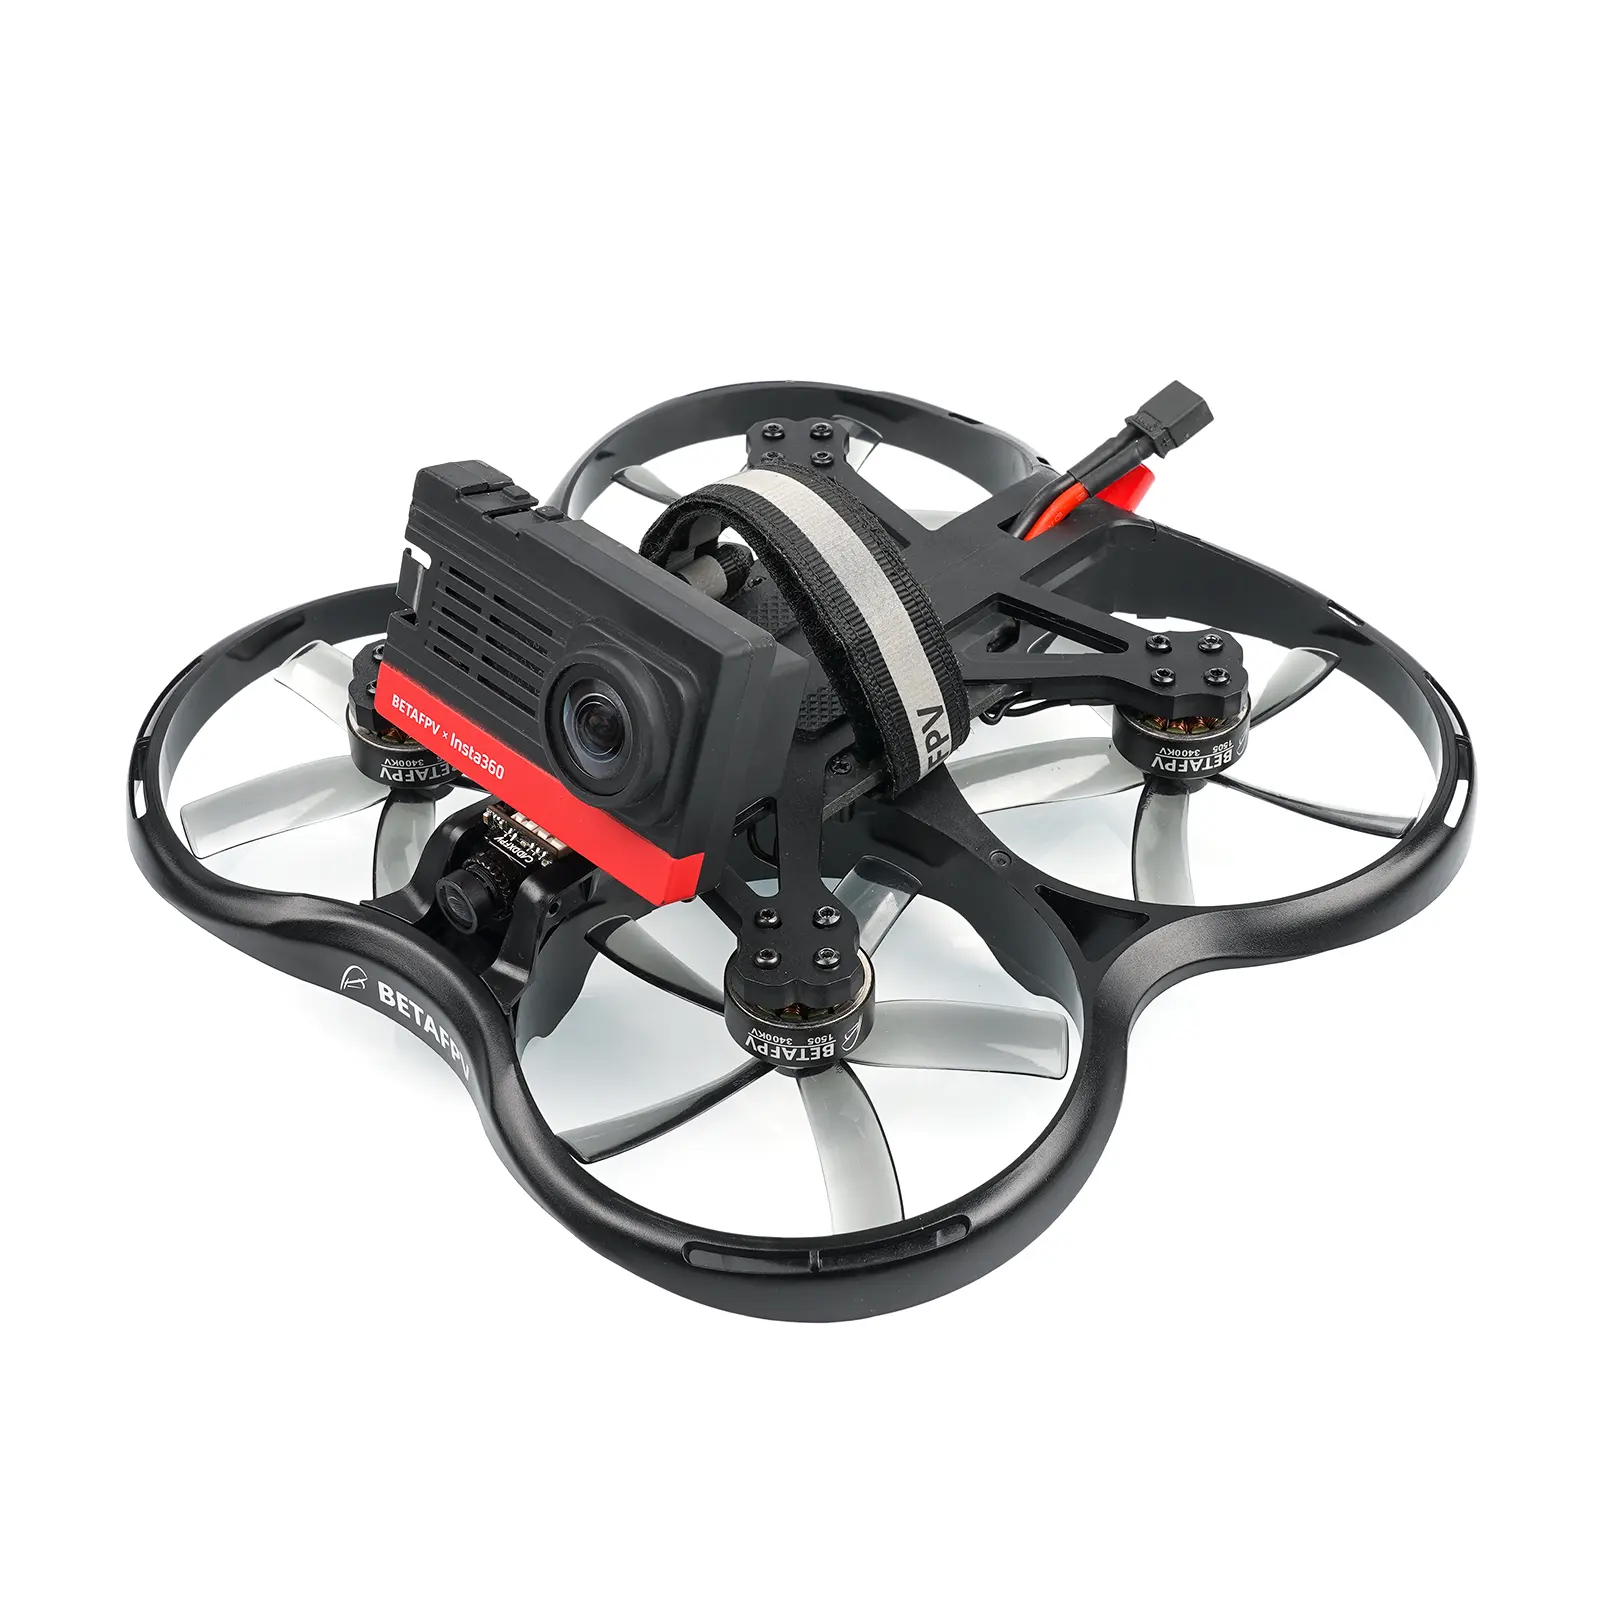 BETAFPV Pavo 30 Whoop Quadcopter Analog Version Fpv Drone-professionnel 4k Drone With Hd Camera And Gps